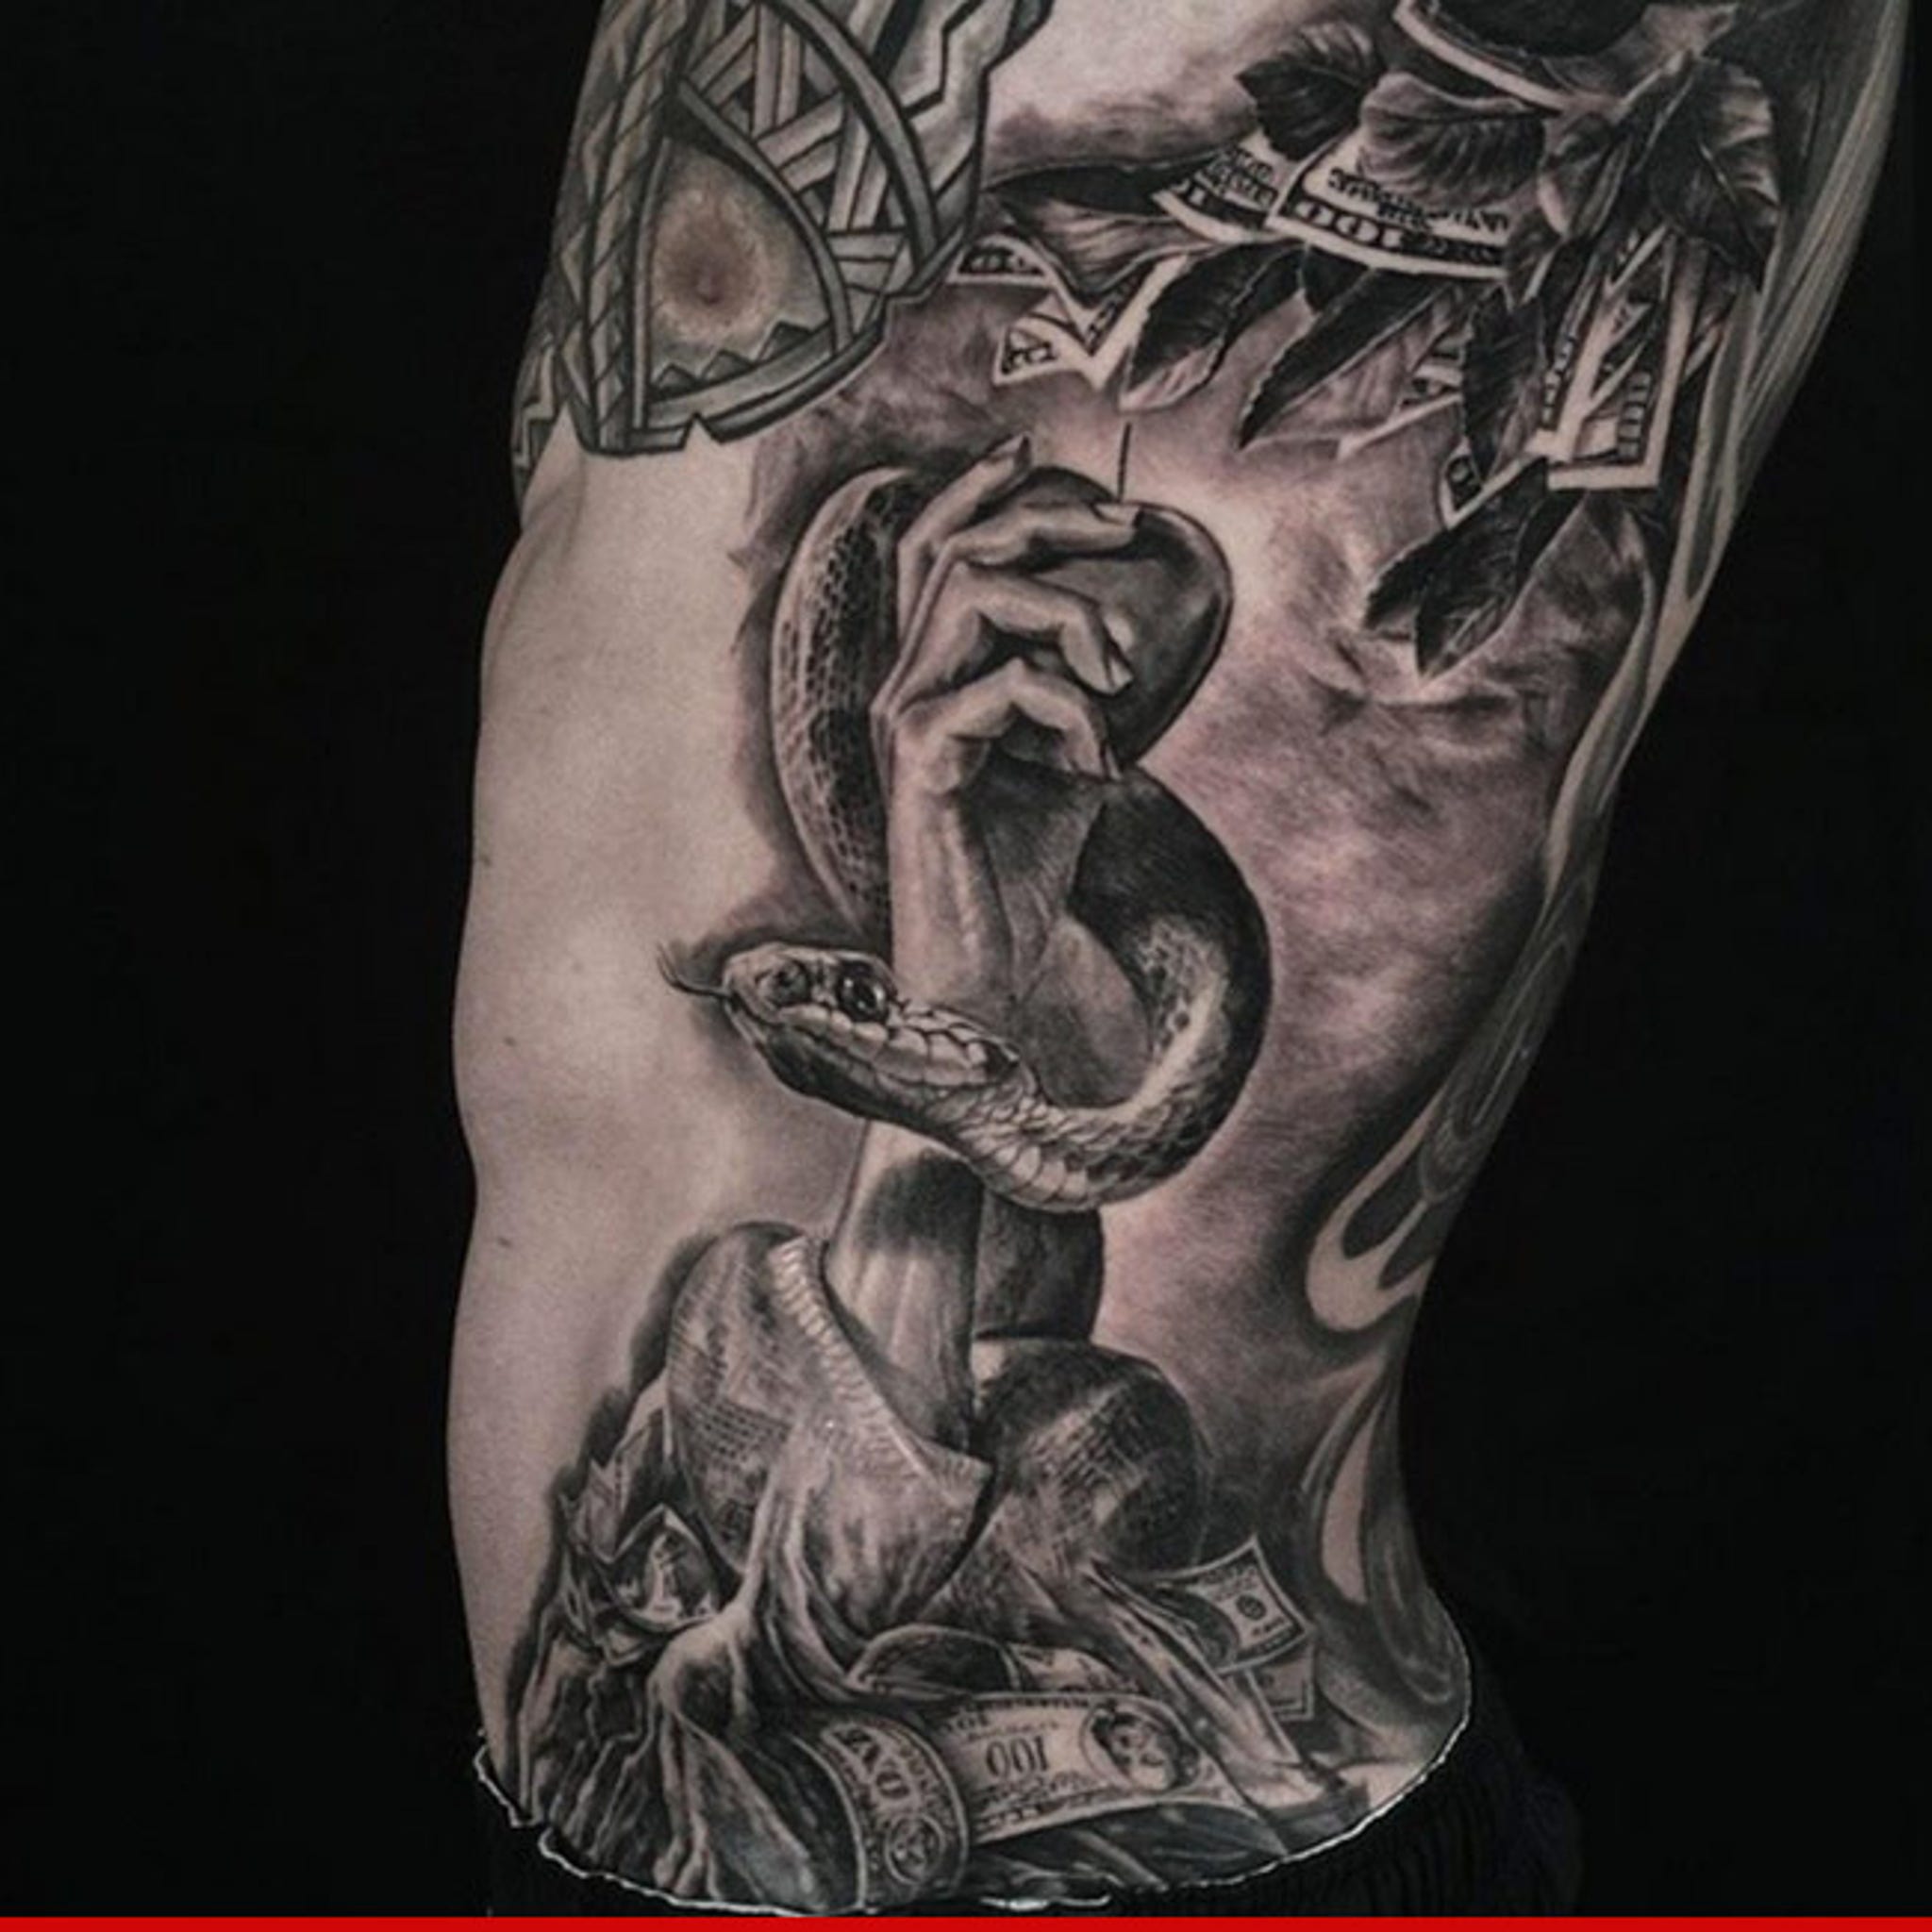 Colin Kaepernick's New Tattoo -- Money Is the Root Of All Evil